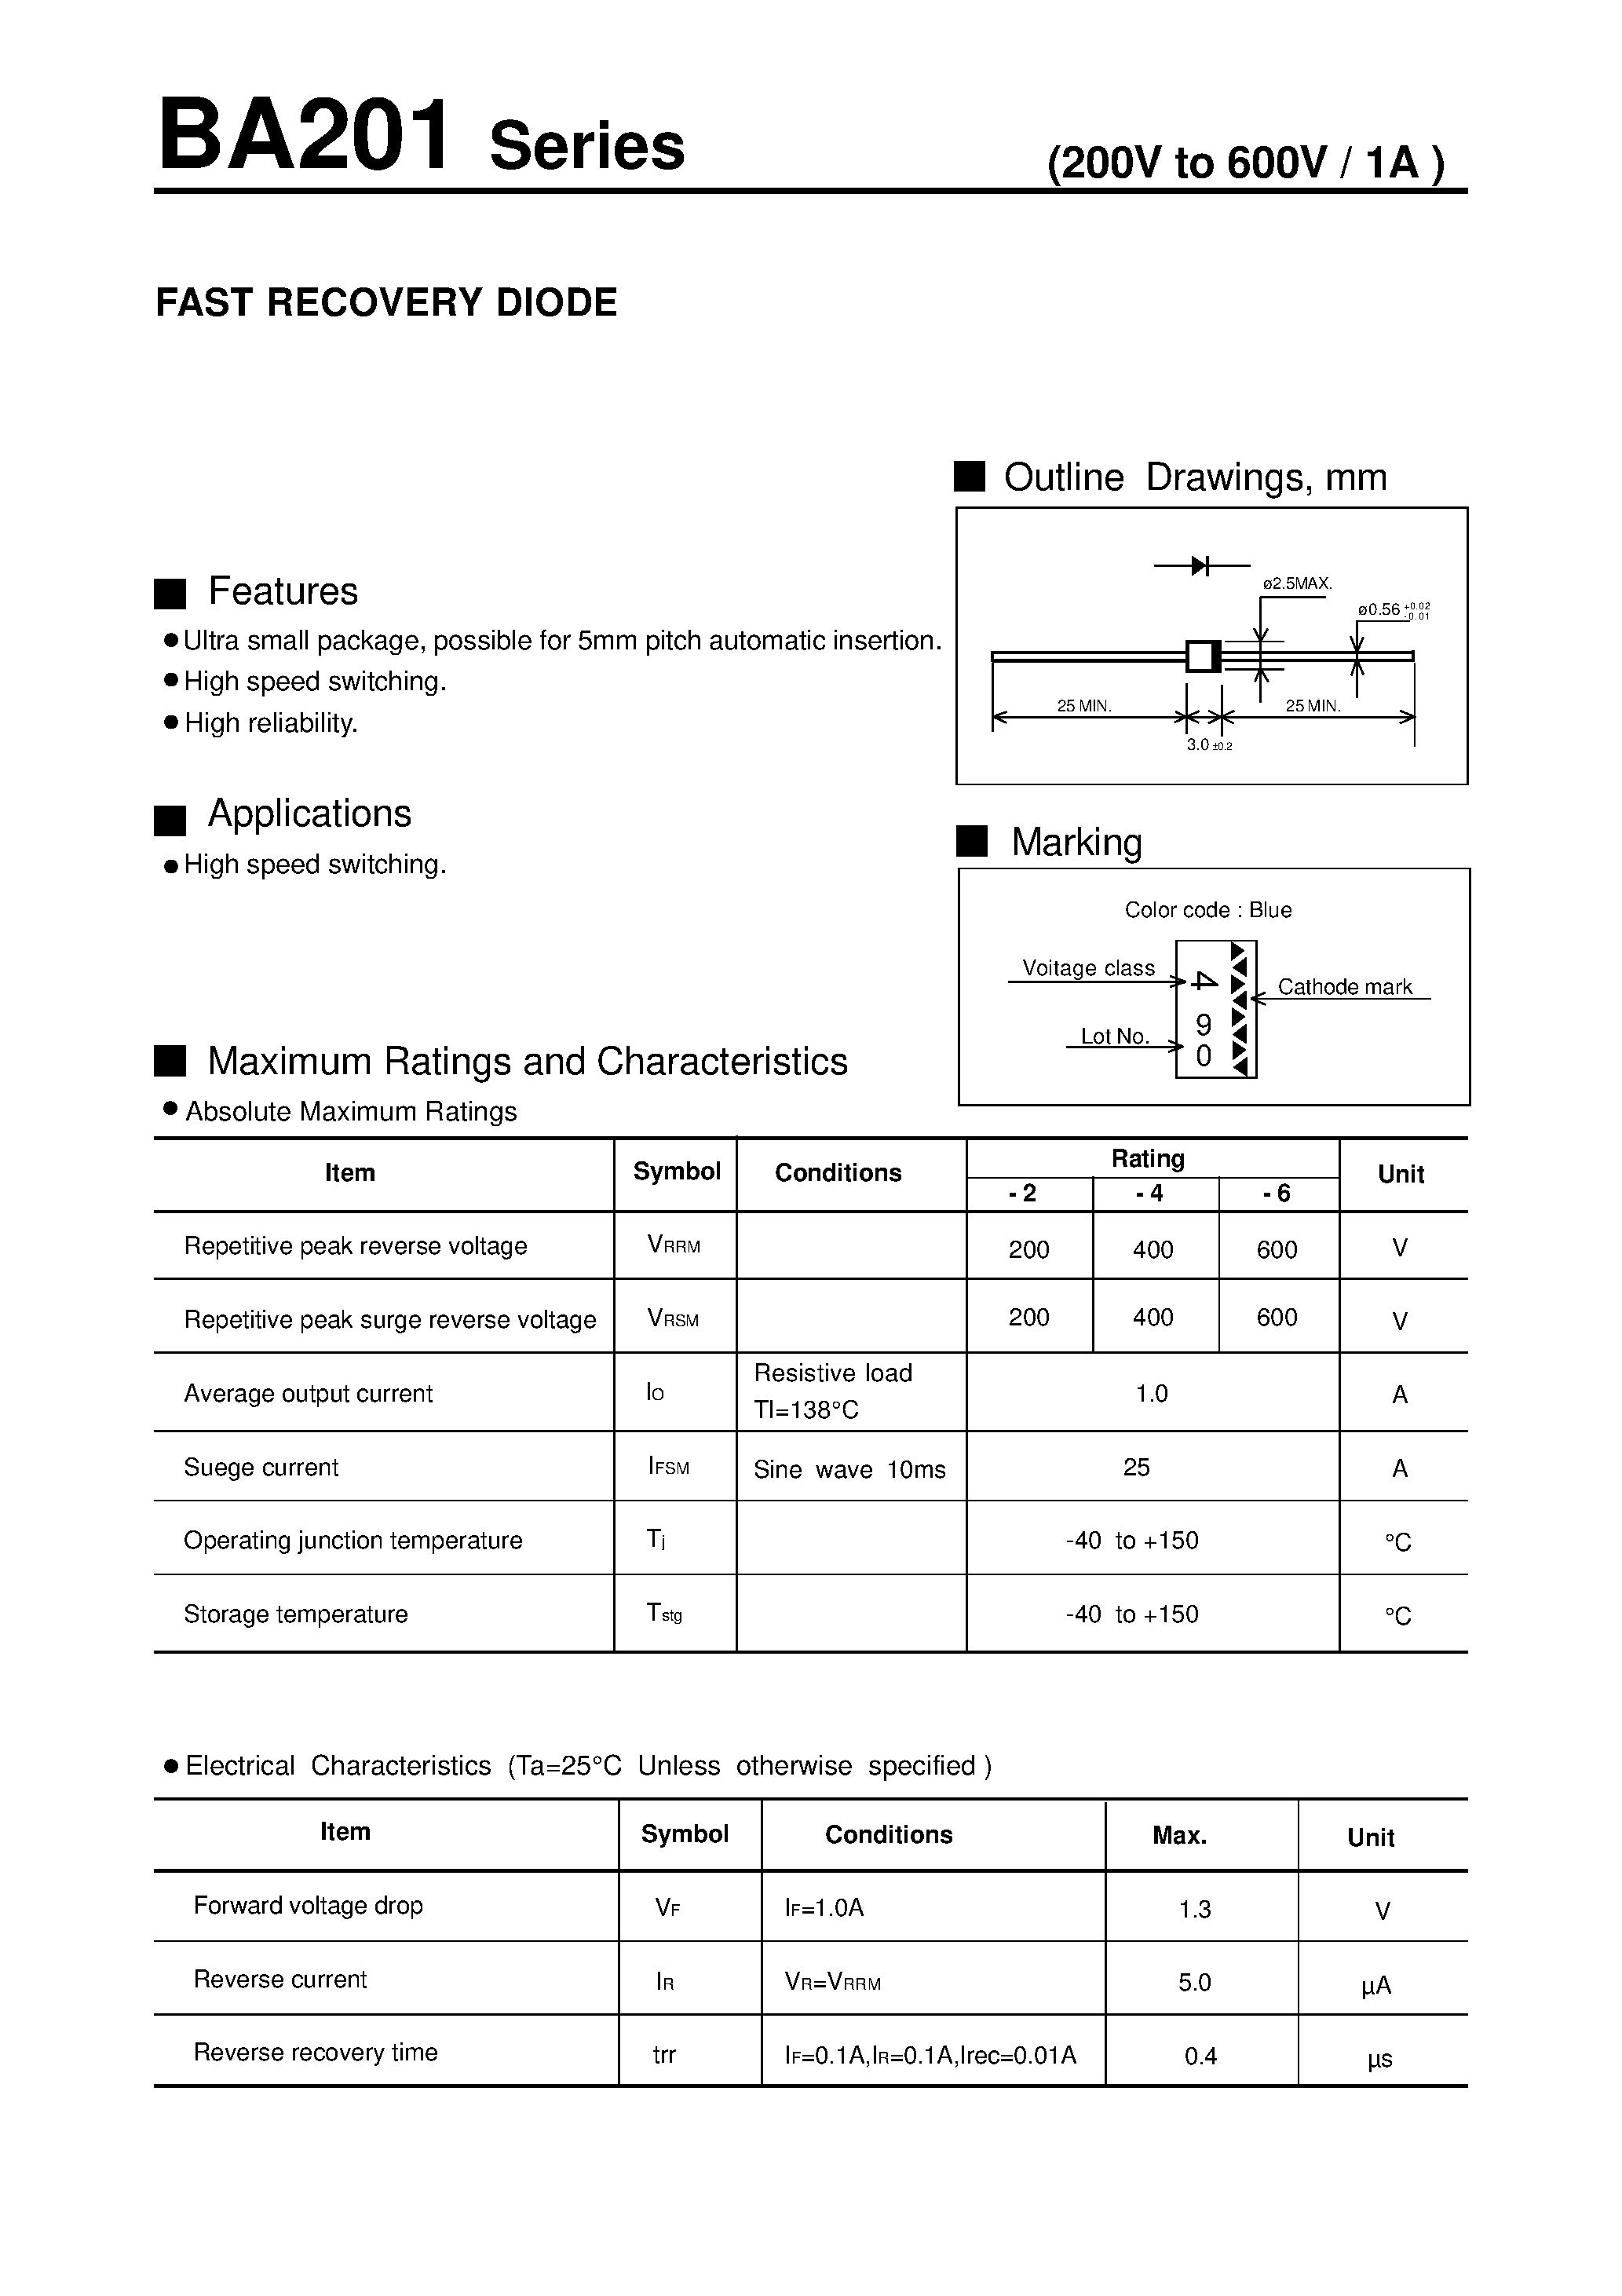 Datasheet BA201 - FAST RECOVERY DIODE page 1